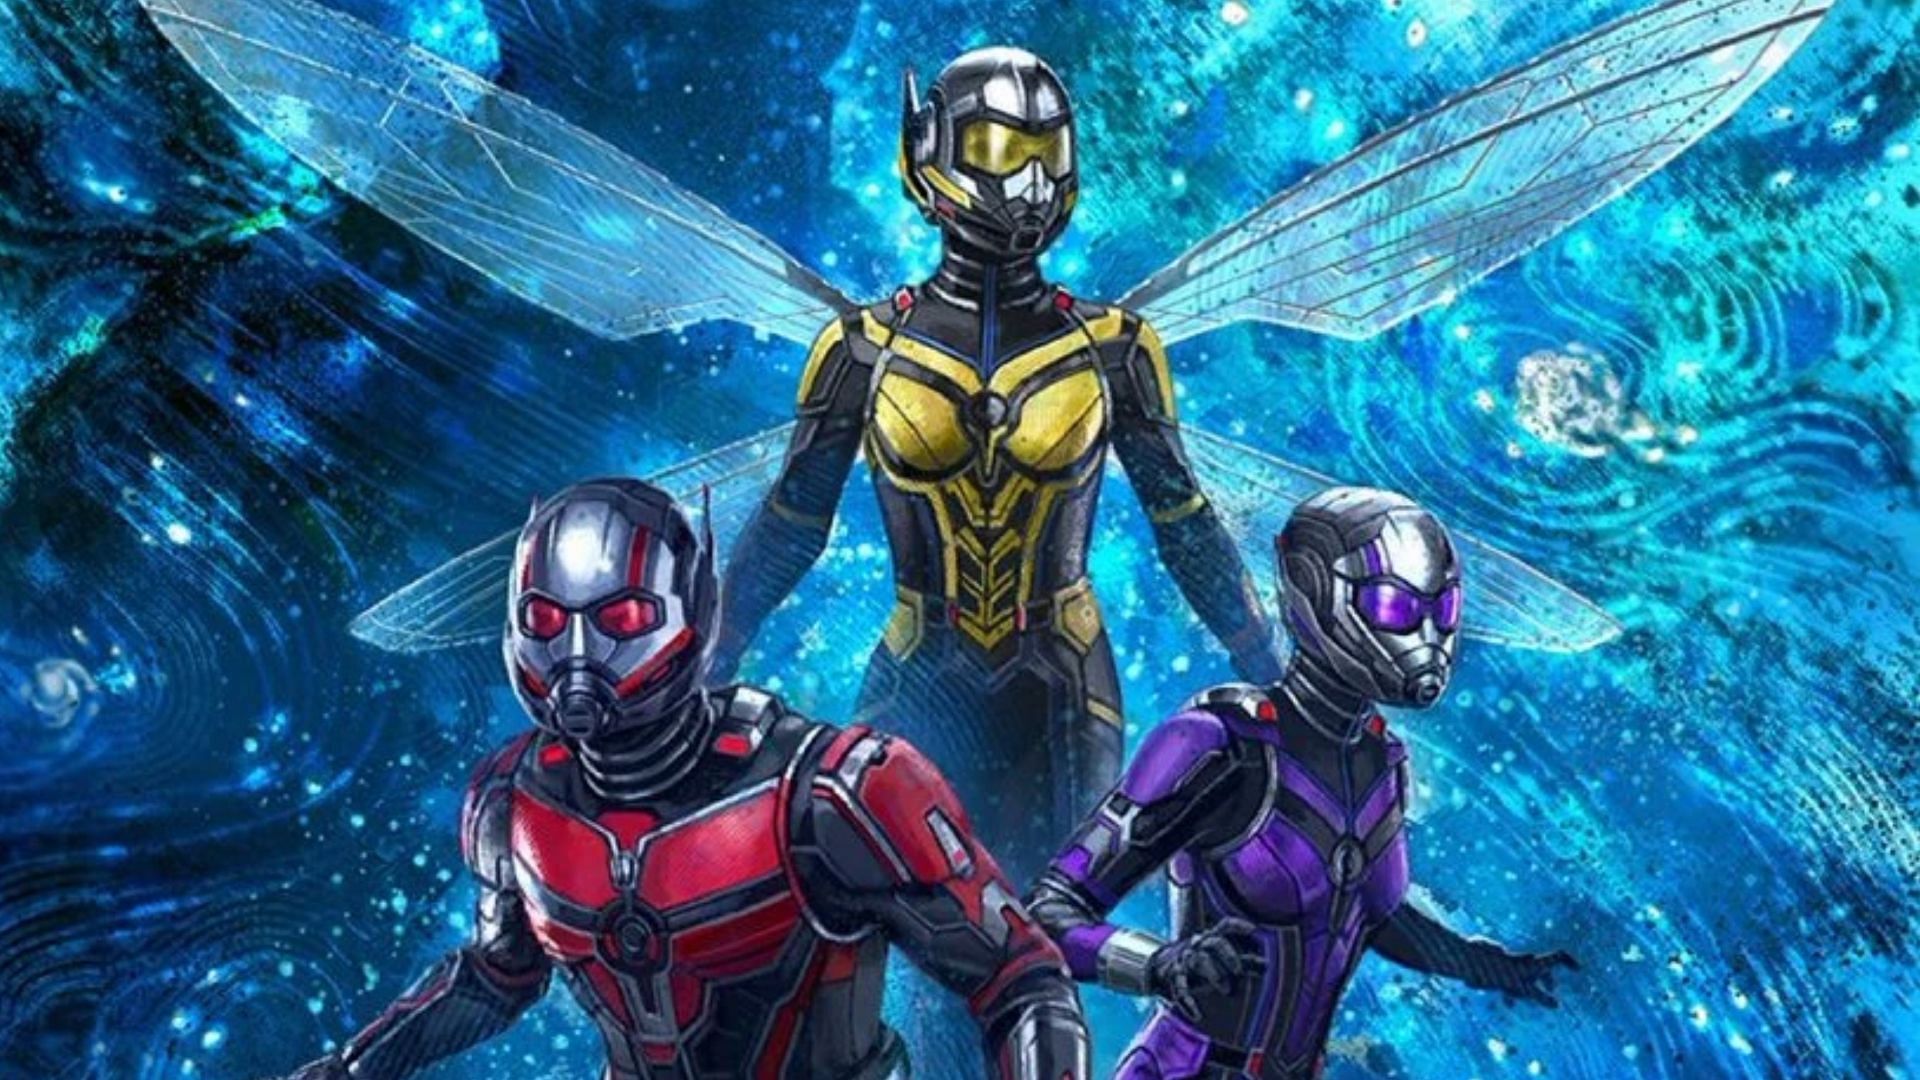 Cassie Lang, Scott Lang and Hope van Dyne in Ant-Man and the Wasp: Quantumania (Image via Marvel Studios)